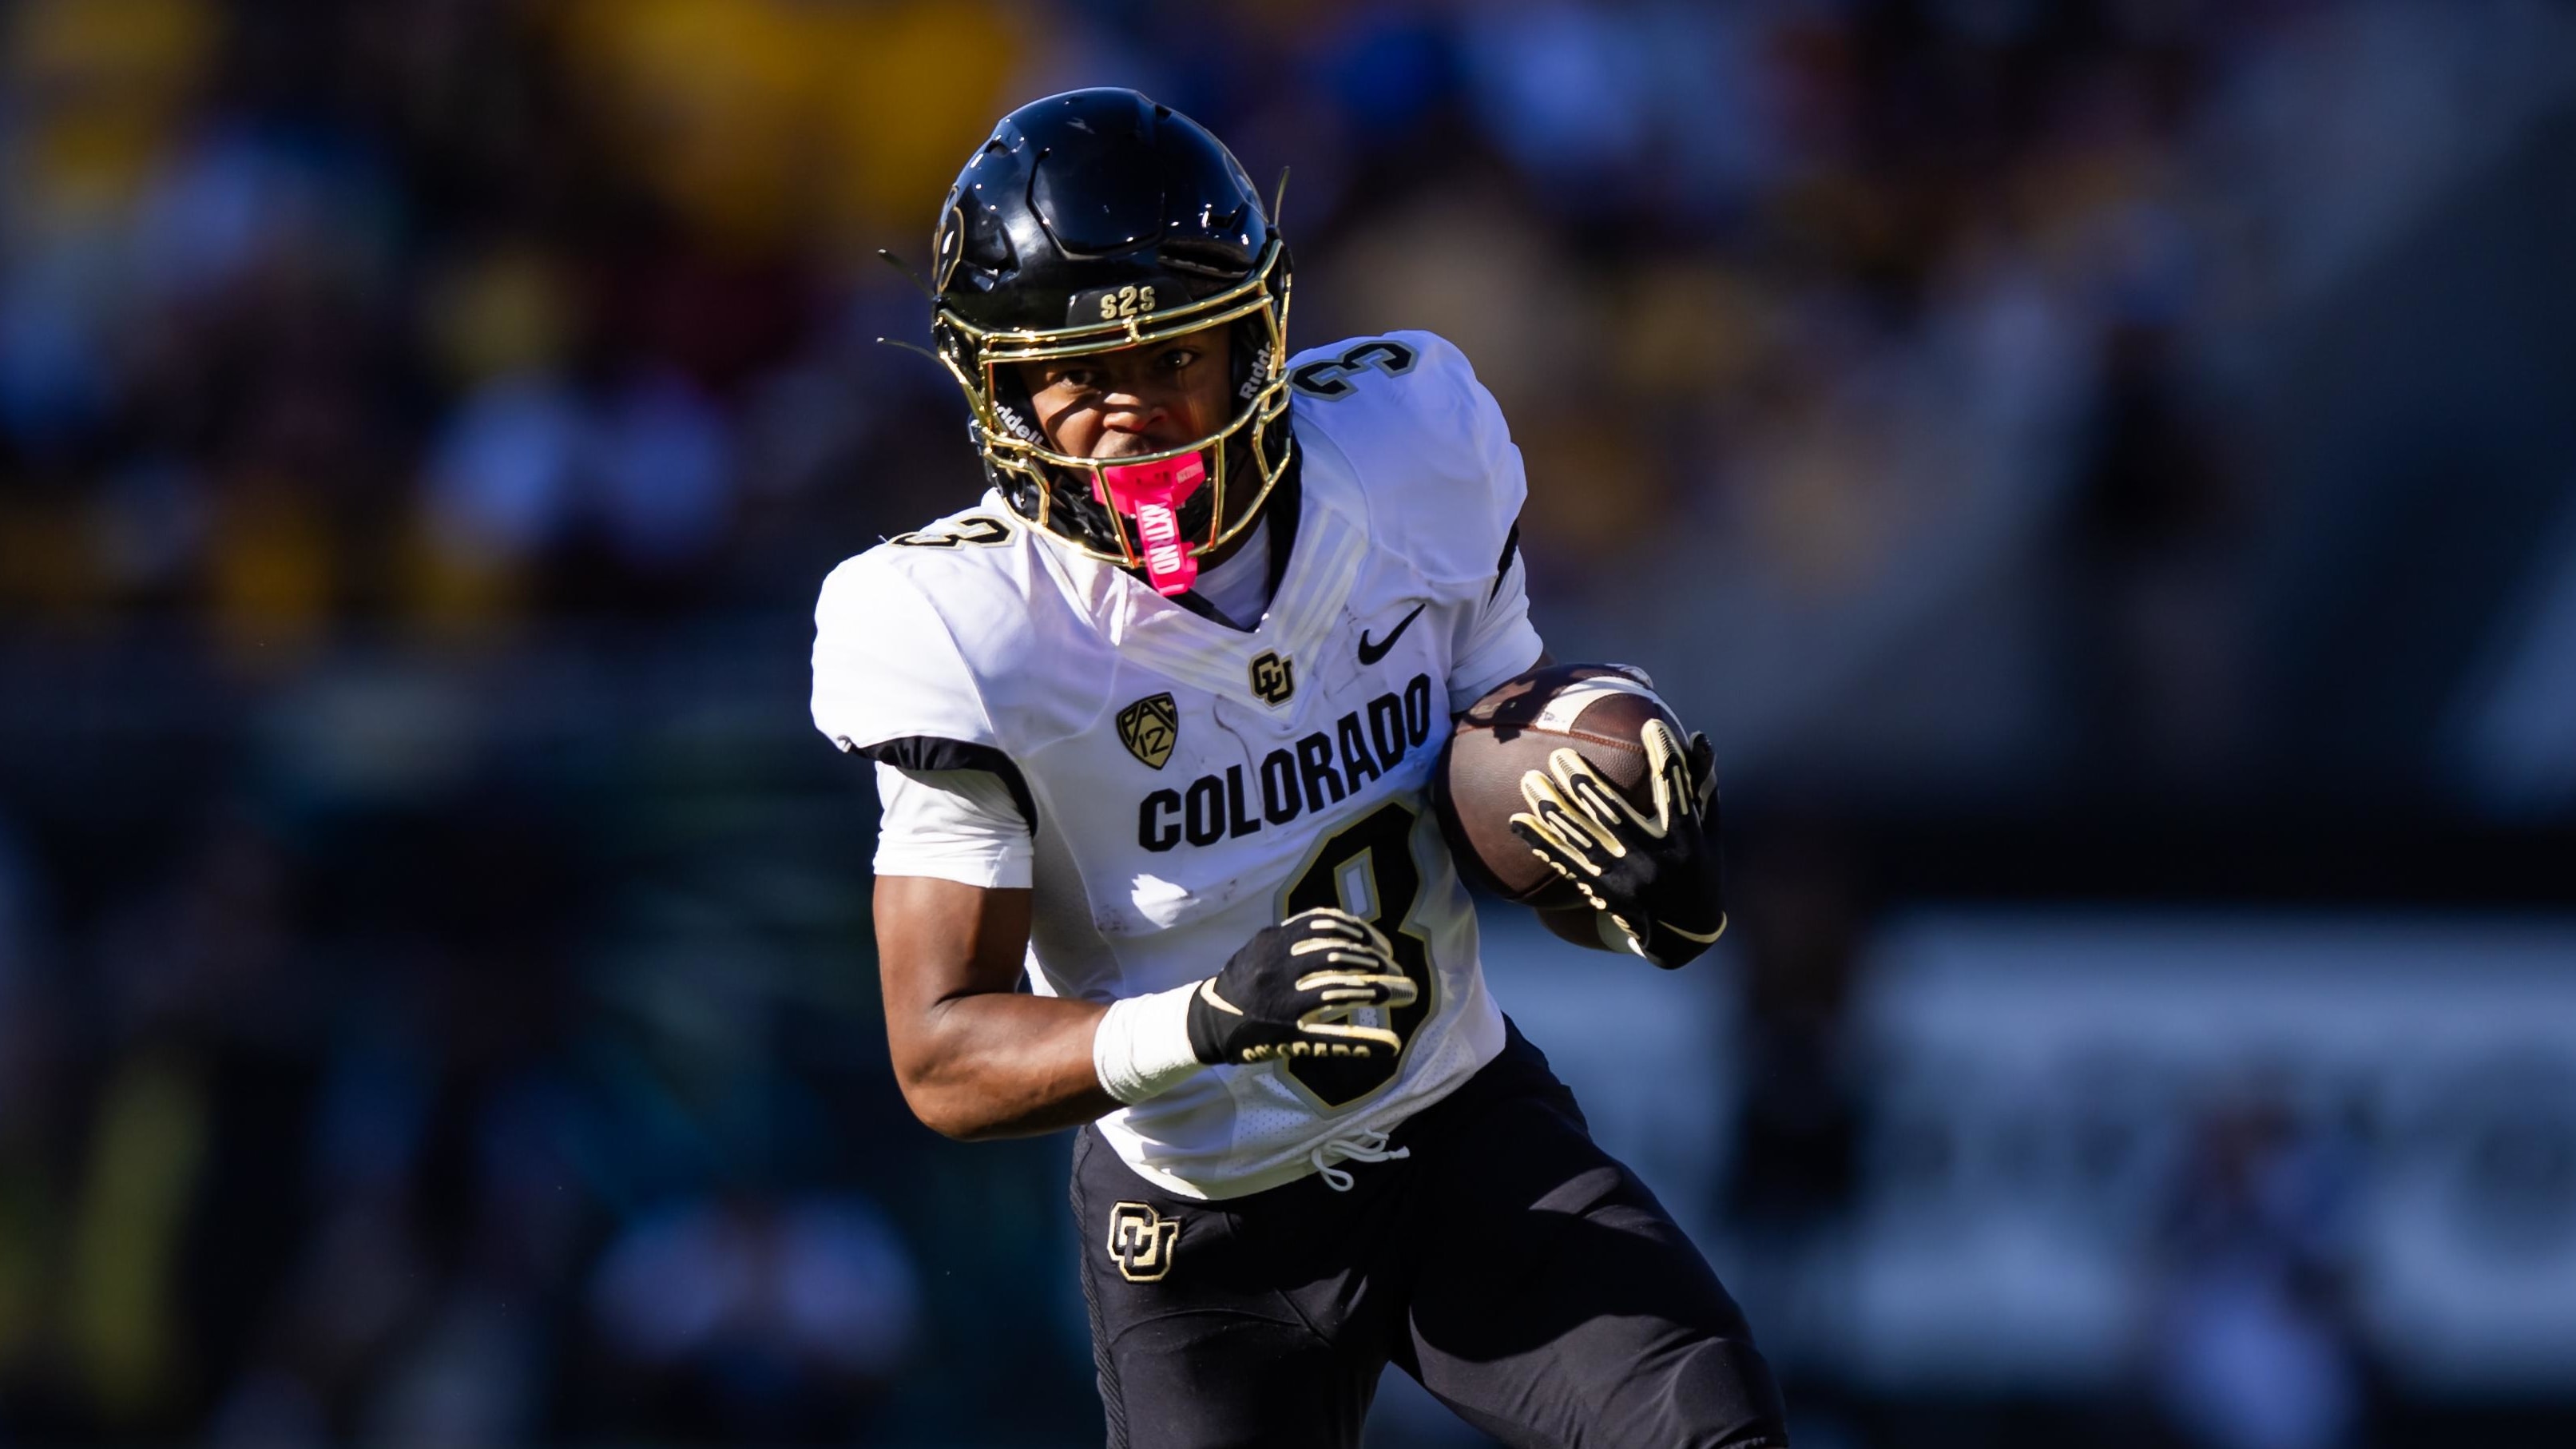 Dylan Edwards says two of Colorado’s rivals are on his short list